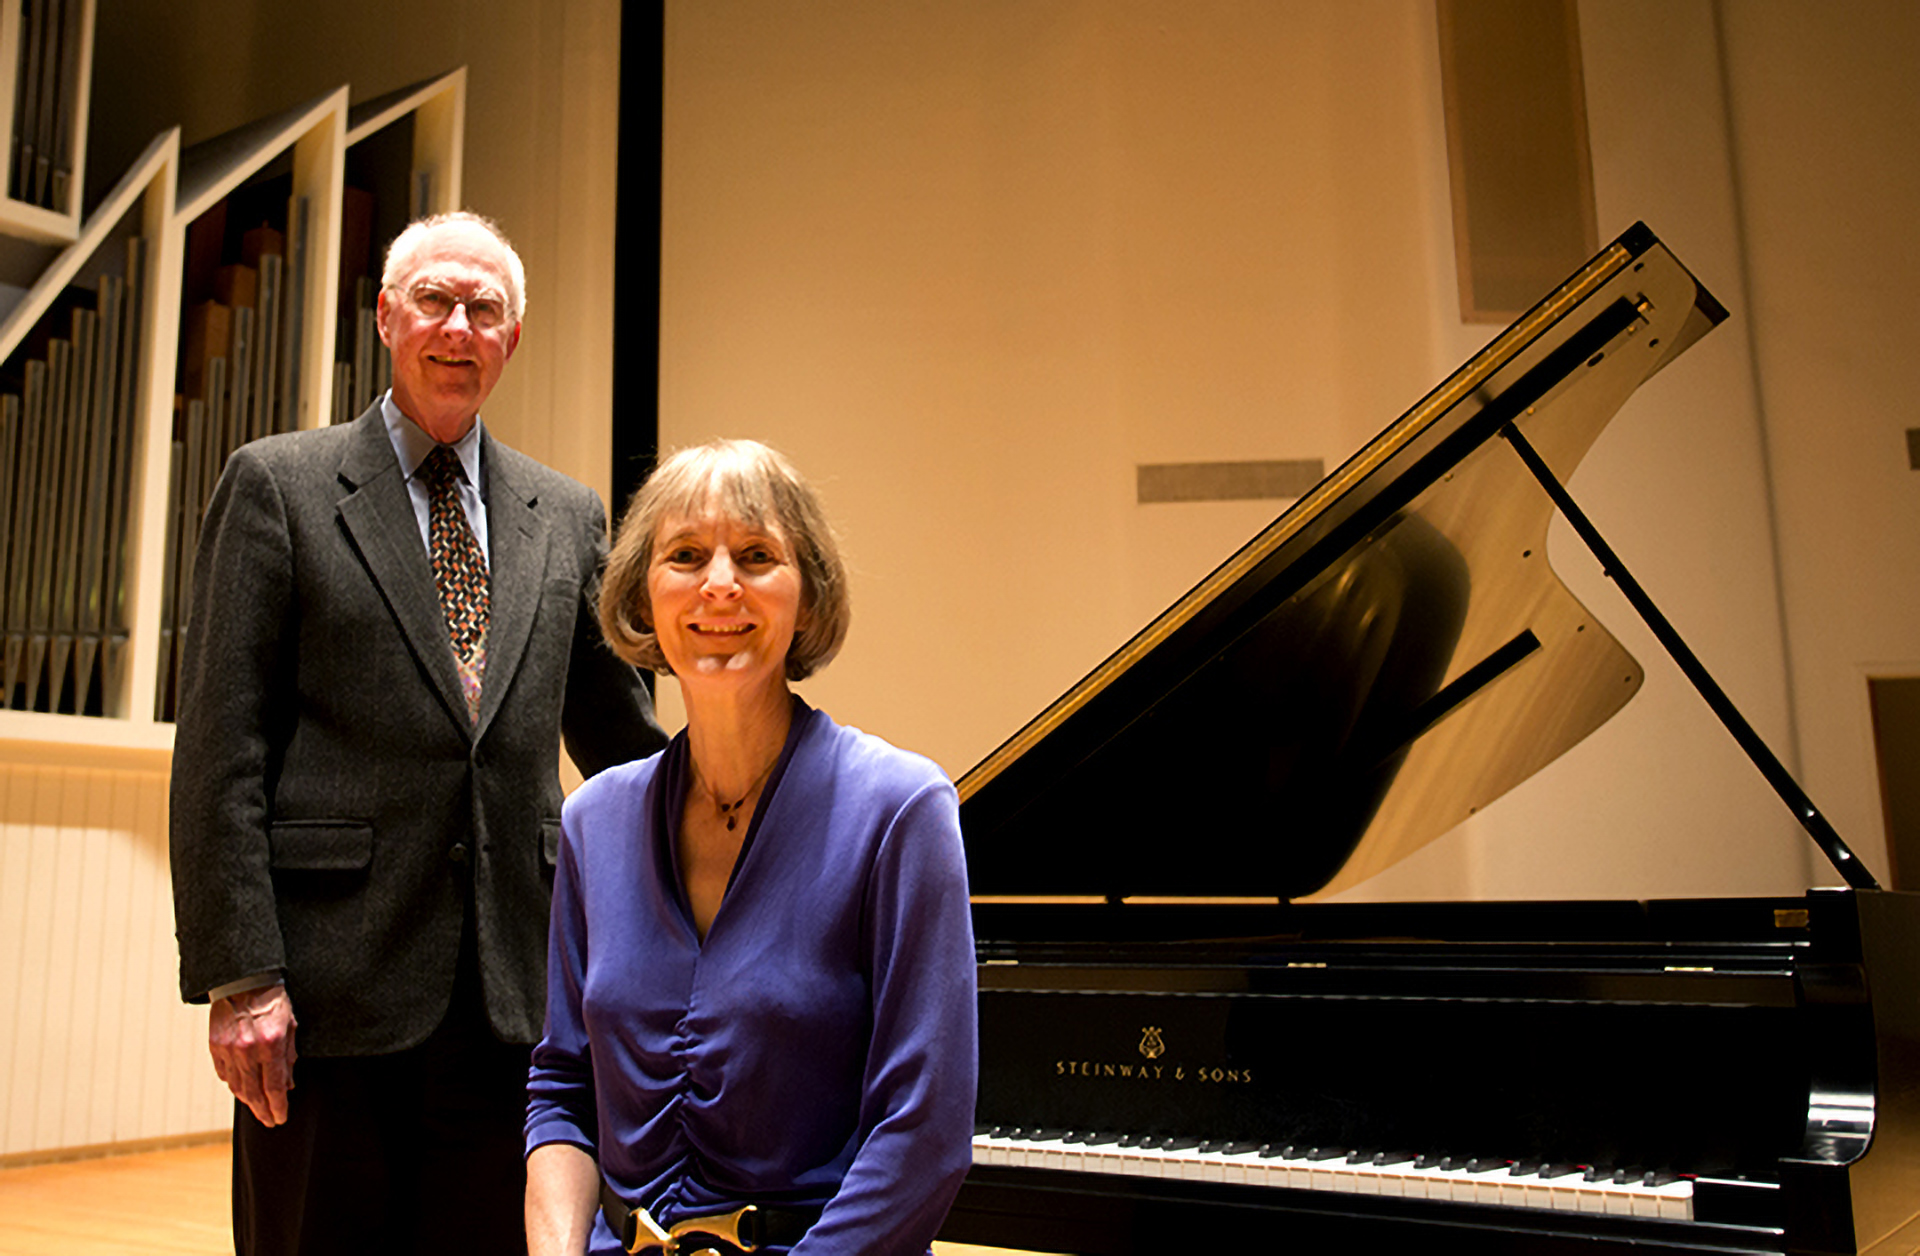 Ford Hill stands and Sybil Sanford is seated at a piano bench on stage in the WWU Concert hall